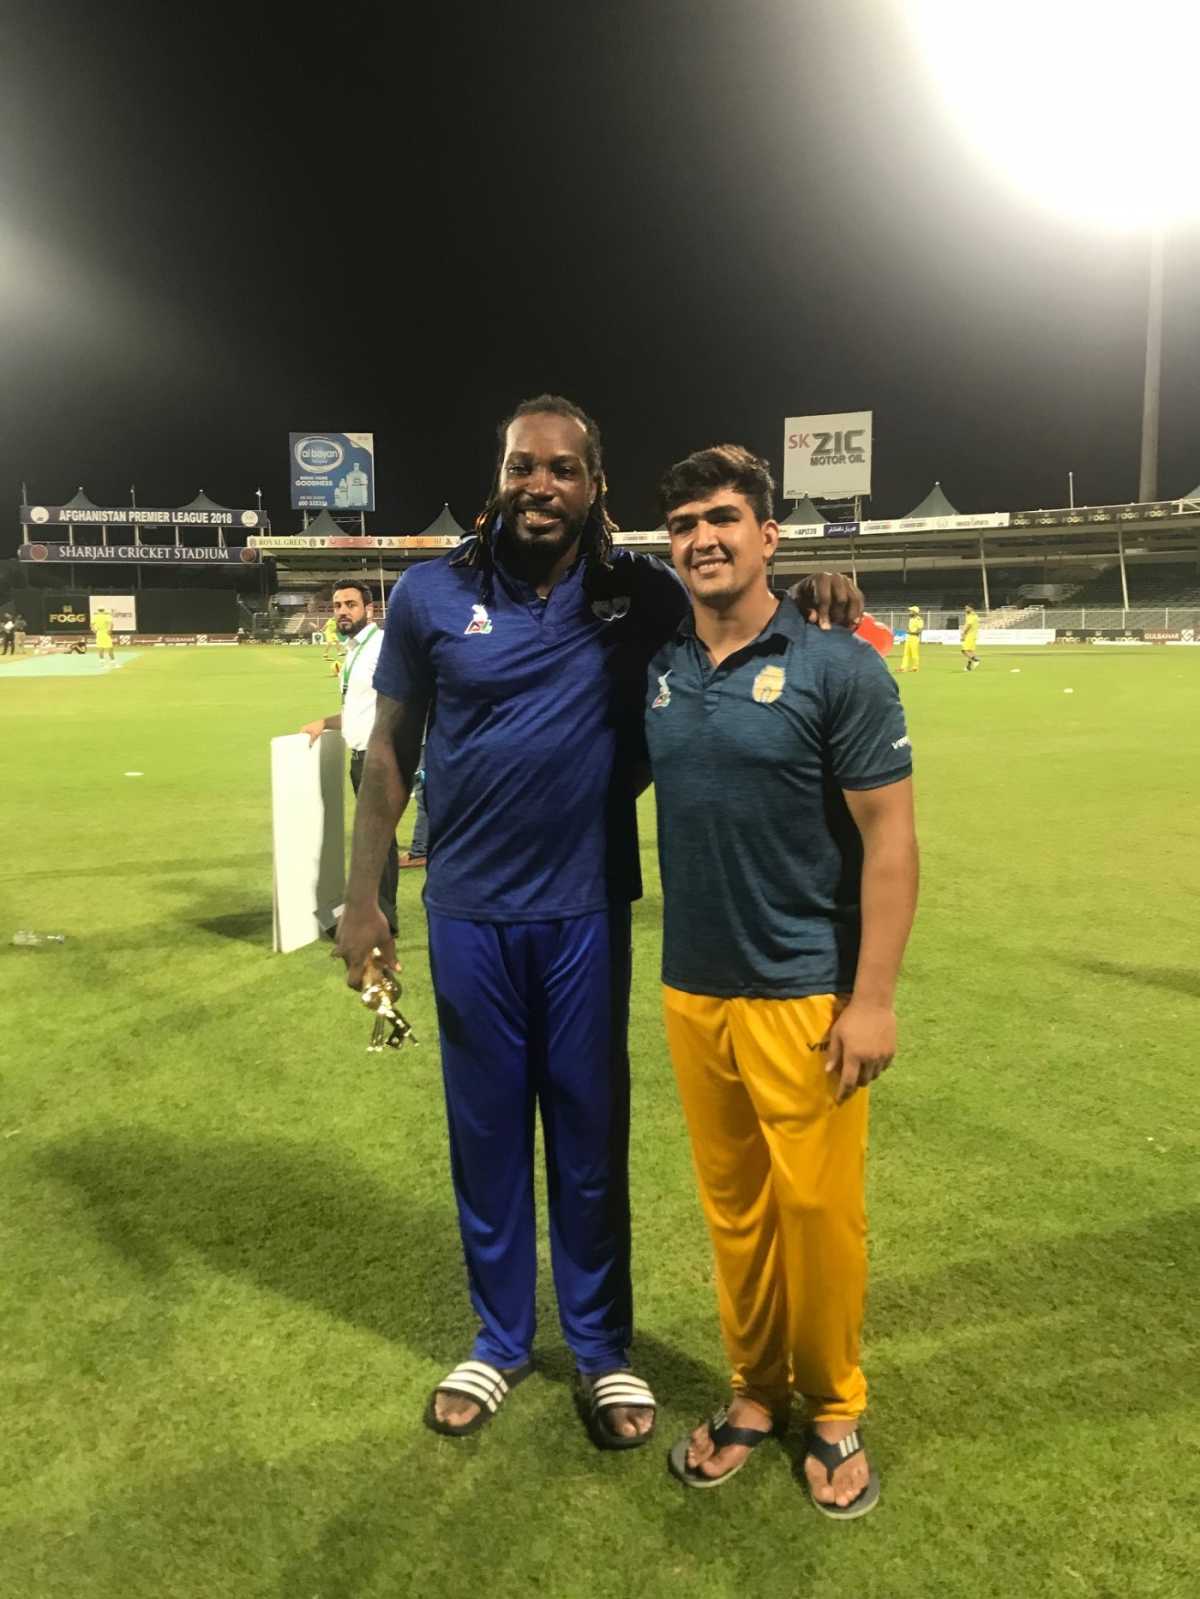 Hazratullah Zazai and his idol Chris Gayle come together for a photo